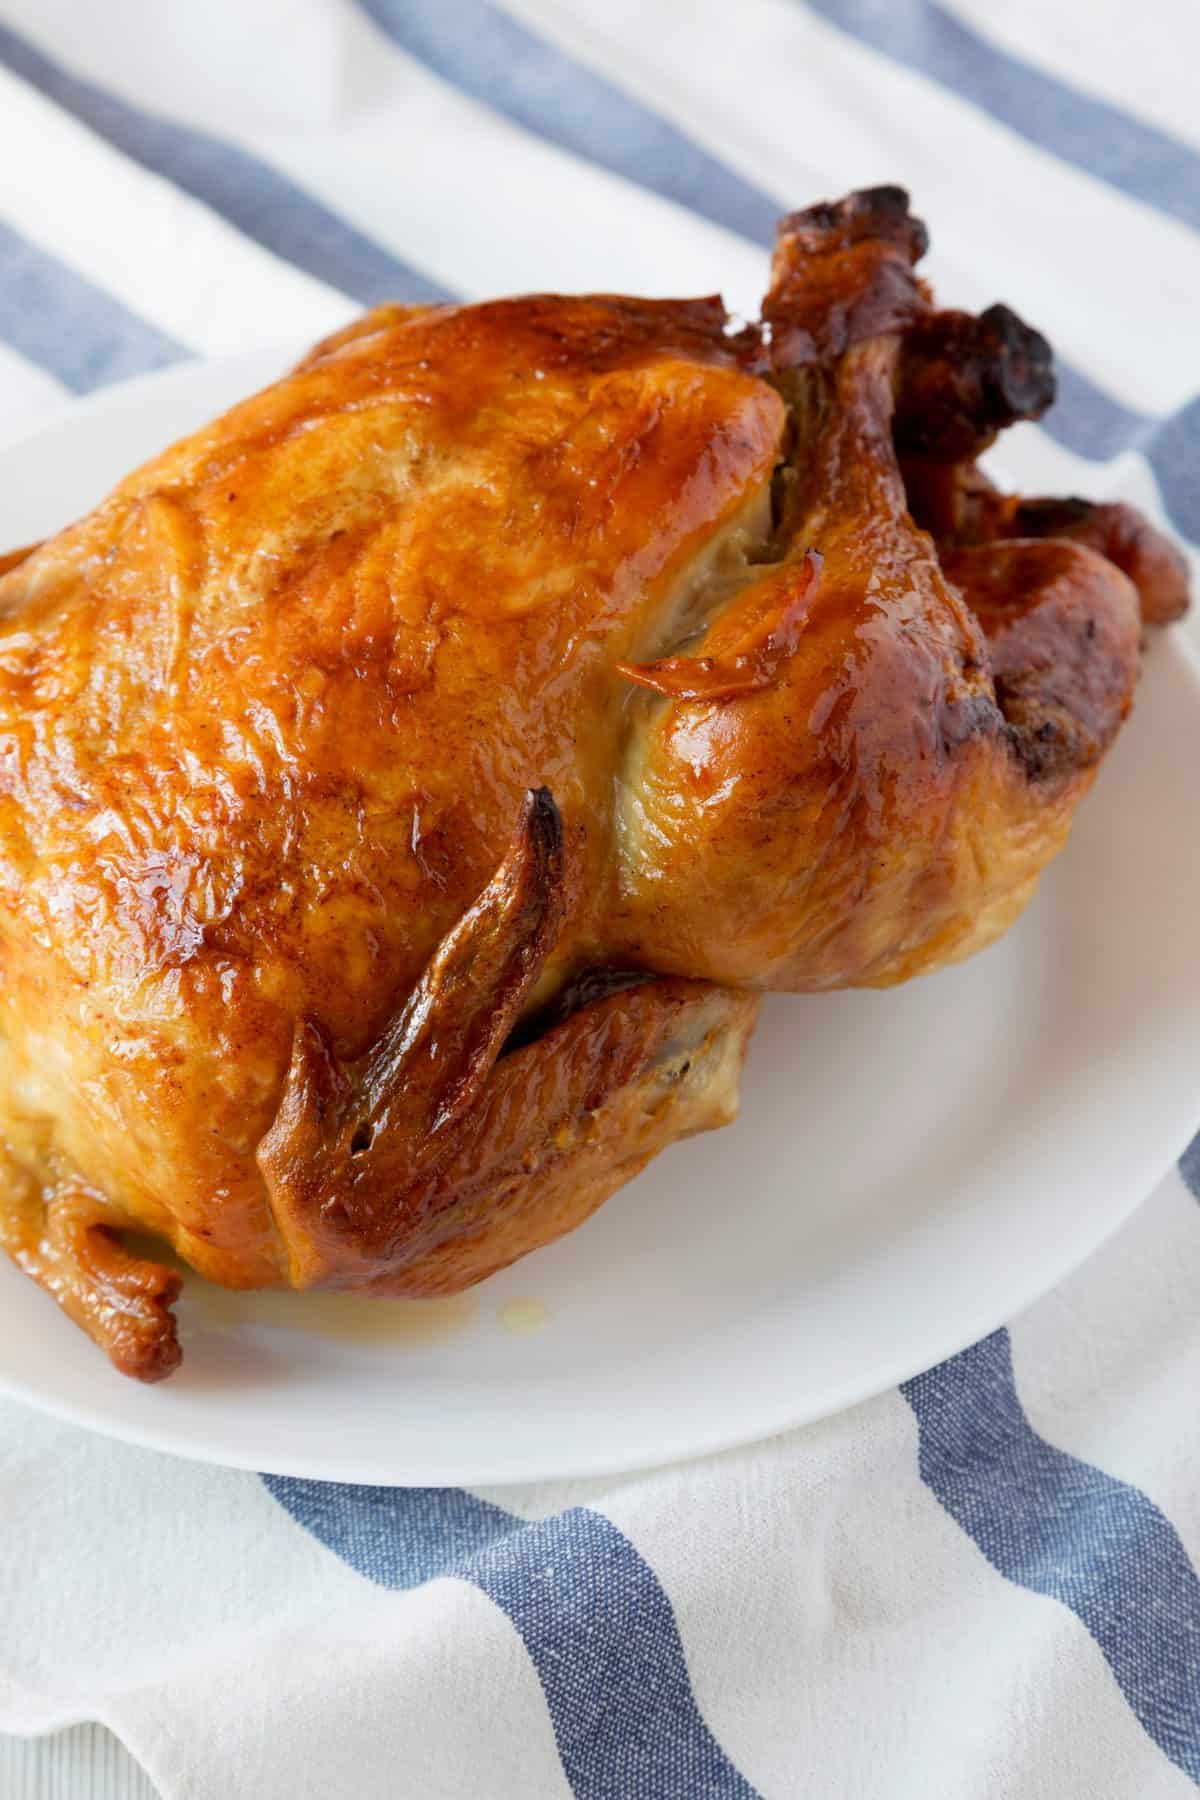 A rotisserie chicken sits on a white plate. The plate sits on a blue and white striped cloth.